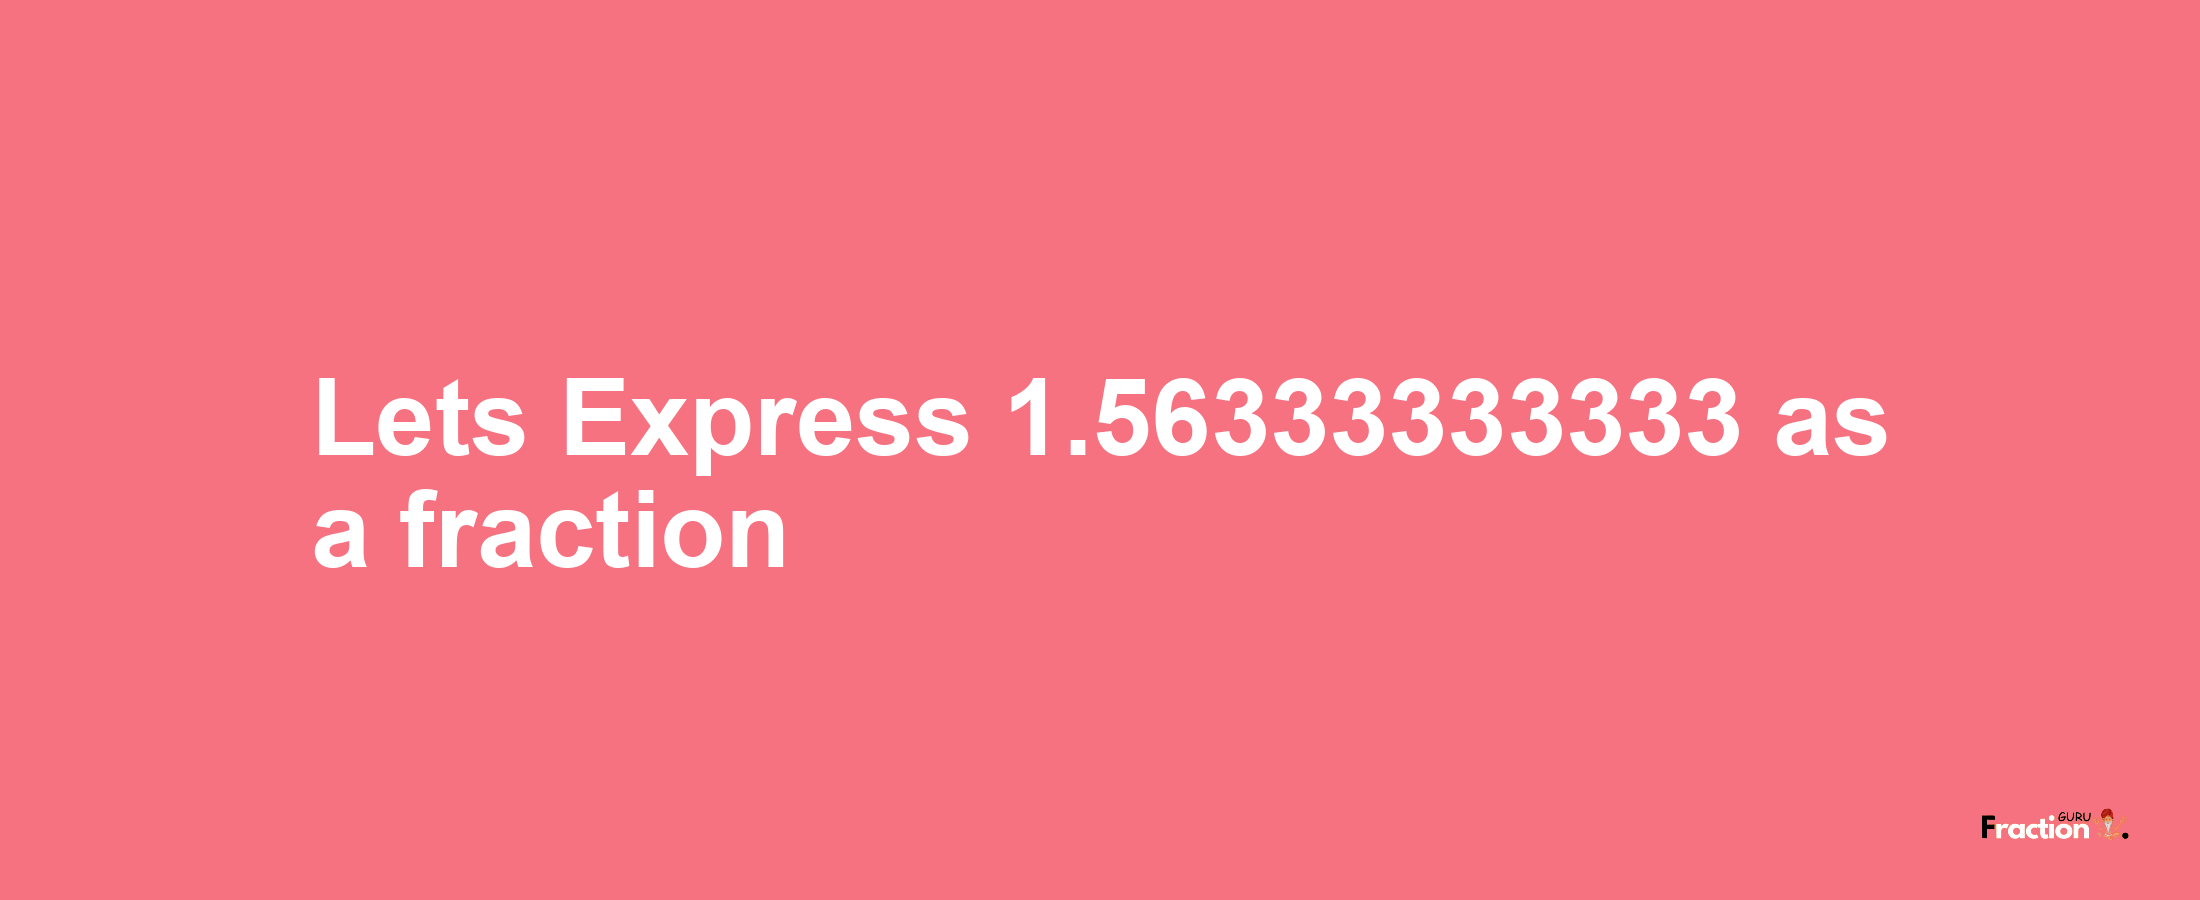 Lets Express 1.56333333333 as afraction